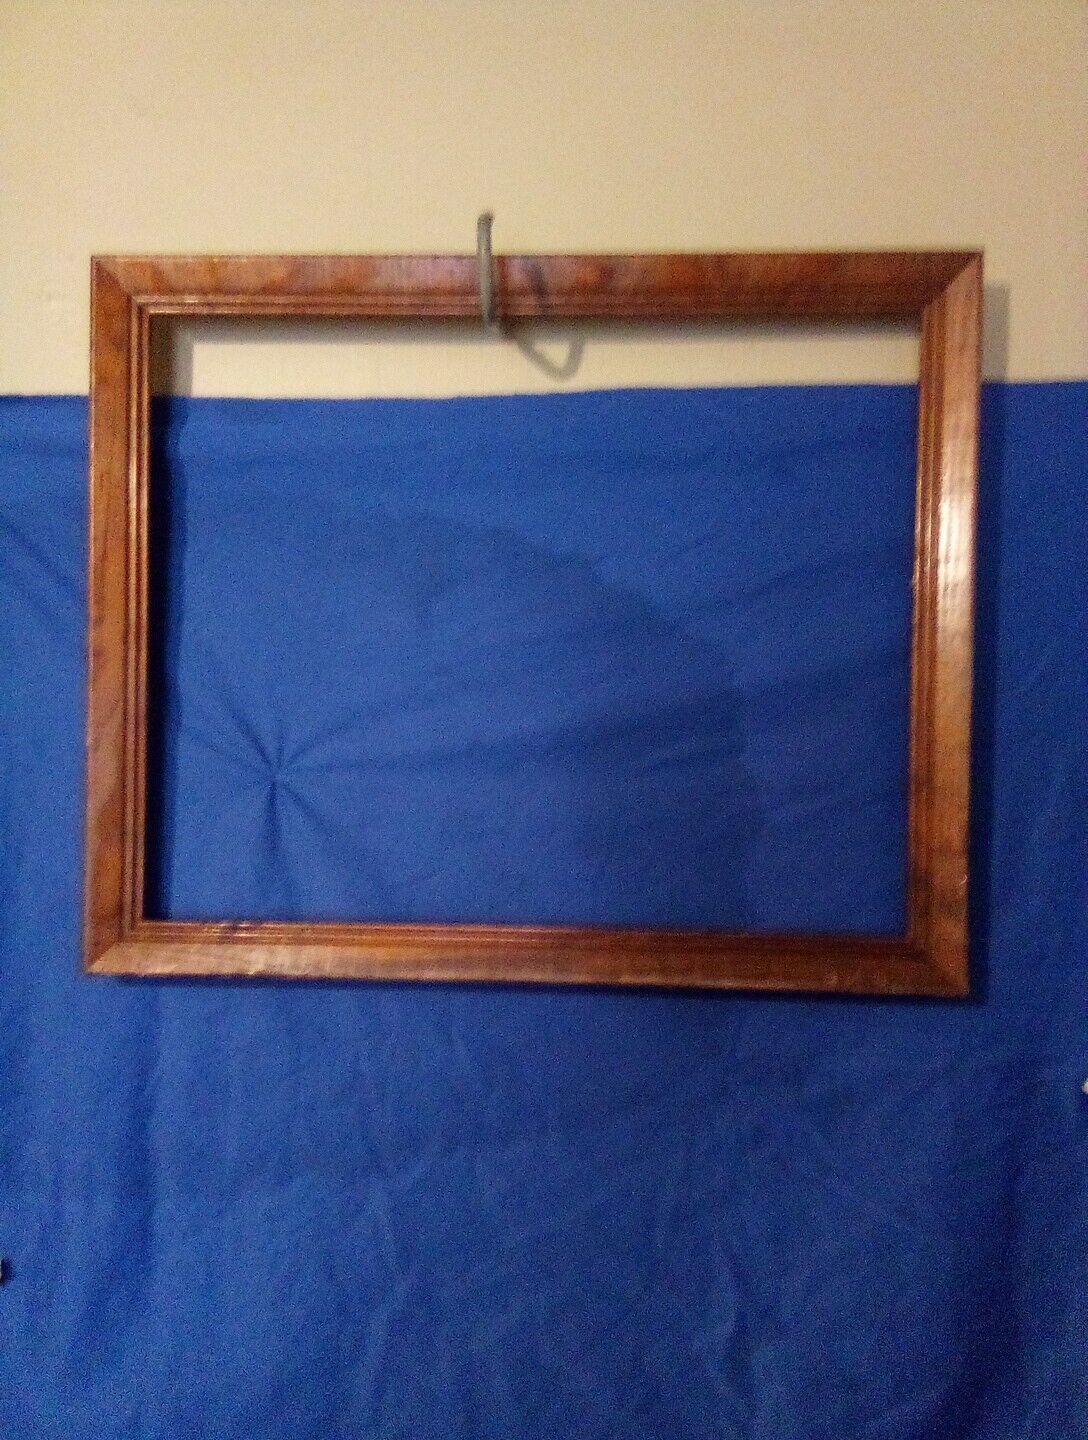 Vintage Picture Frame Holds A 20x16 Picture Overall Size Is 18x22